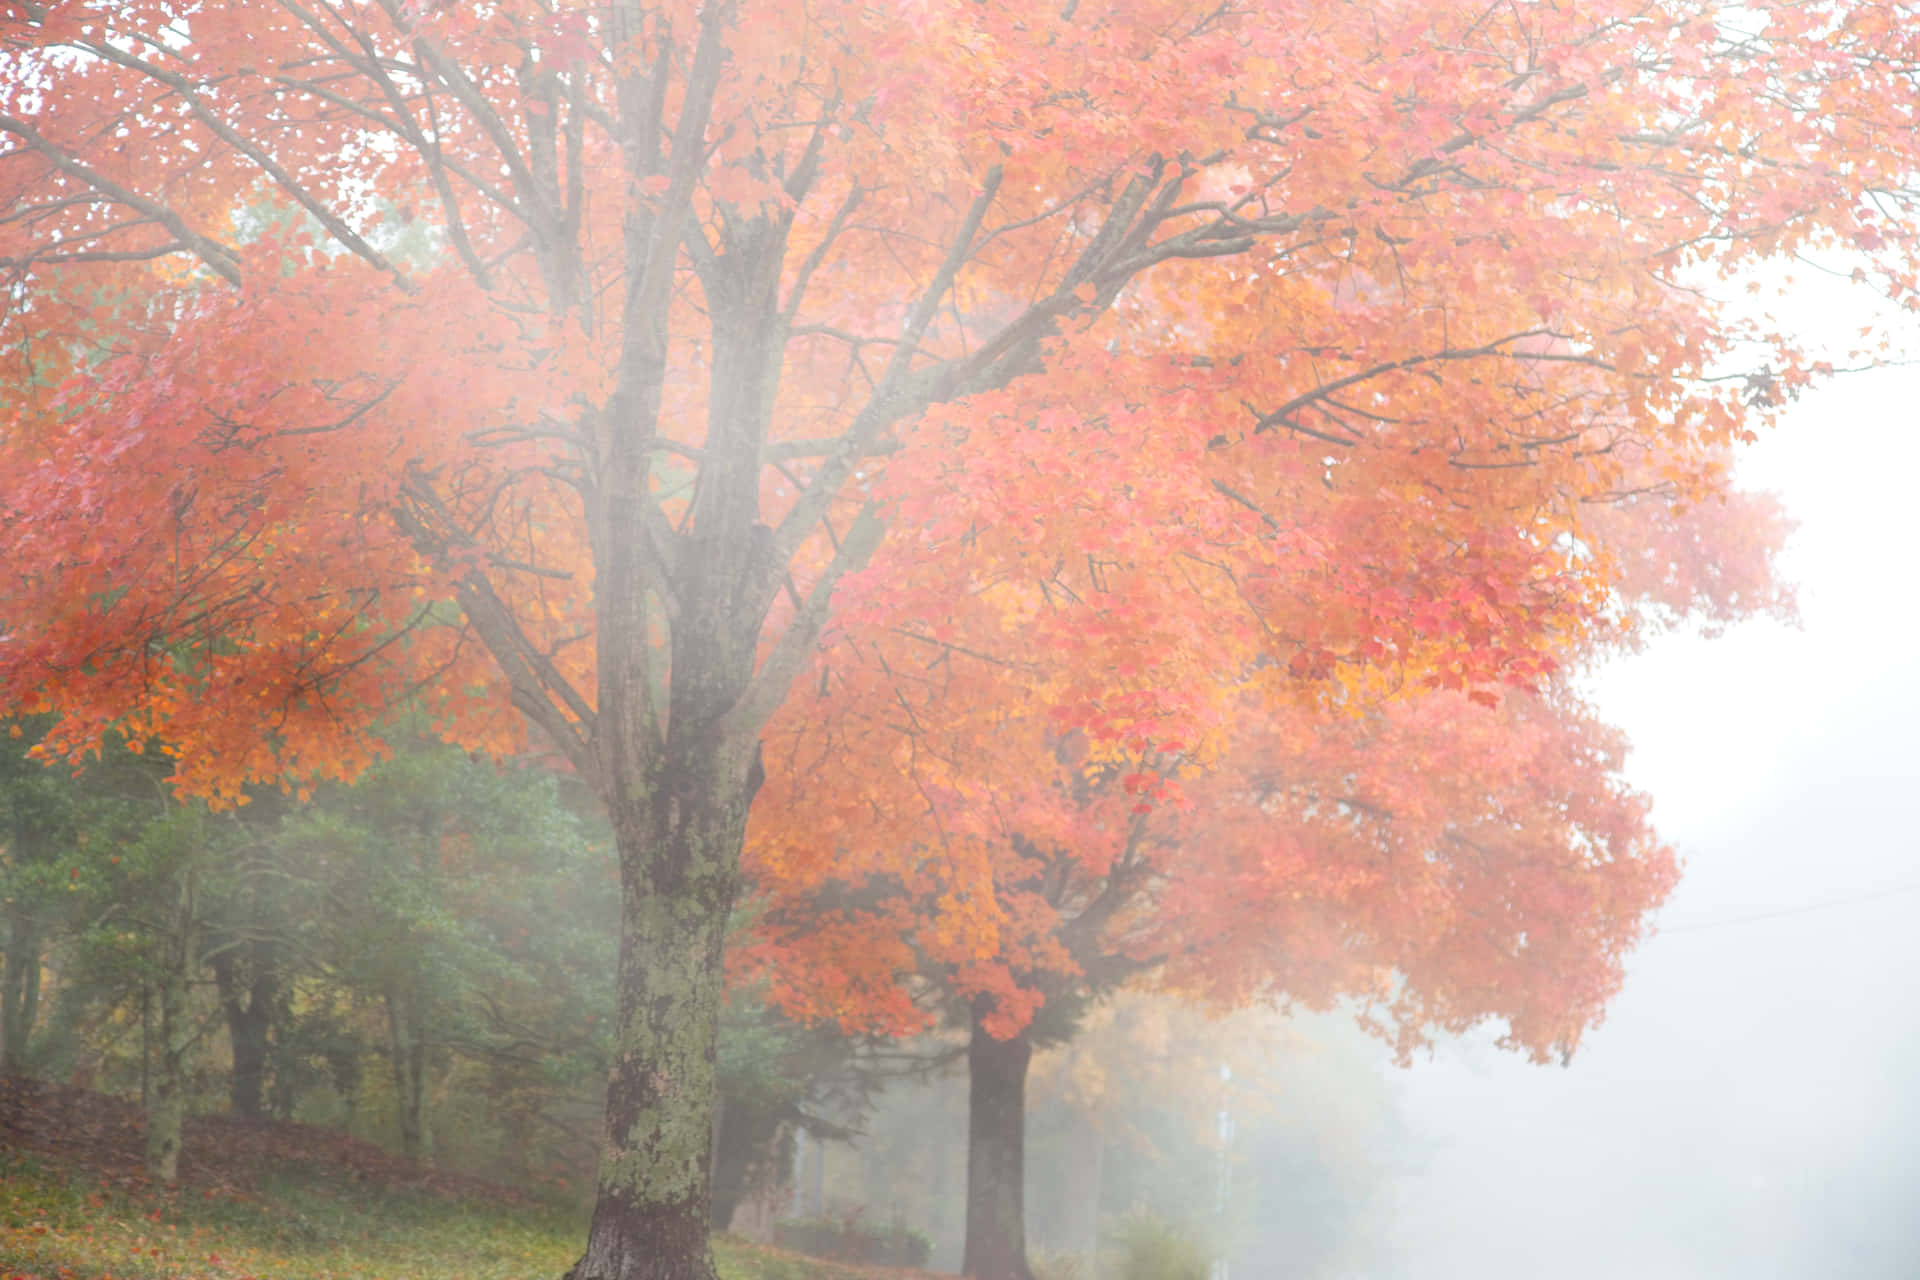 Enchanting Fall Fog in the Forest Wallpaper